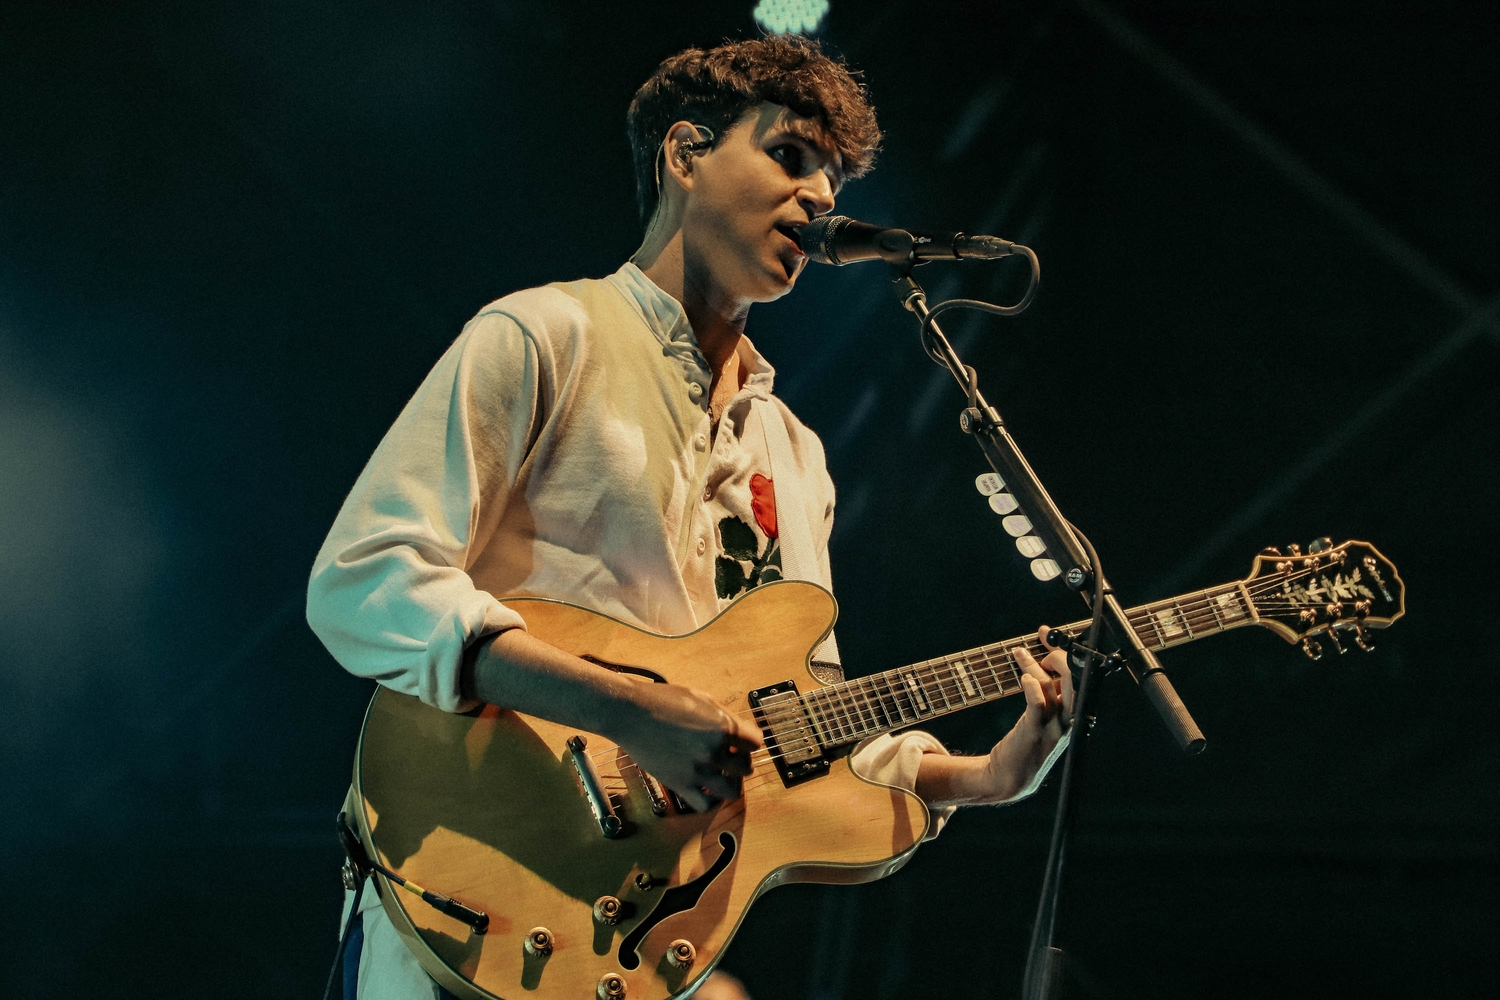 Vampire Weekend's new album is called 'FOTB' - but what could it mean?